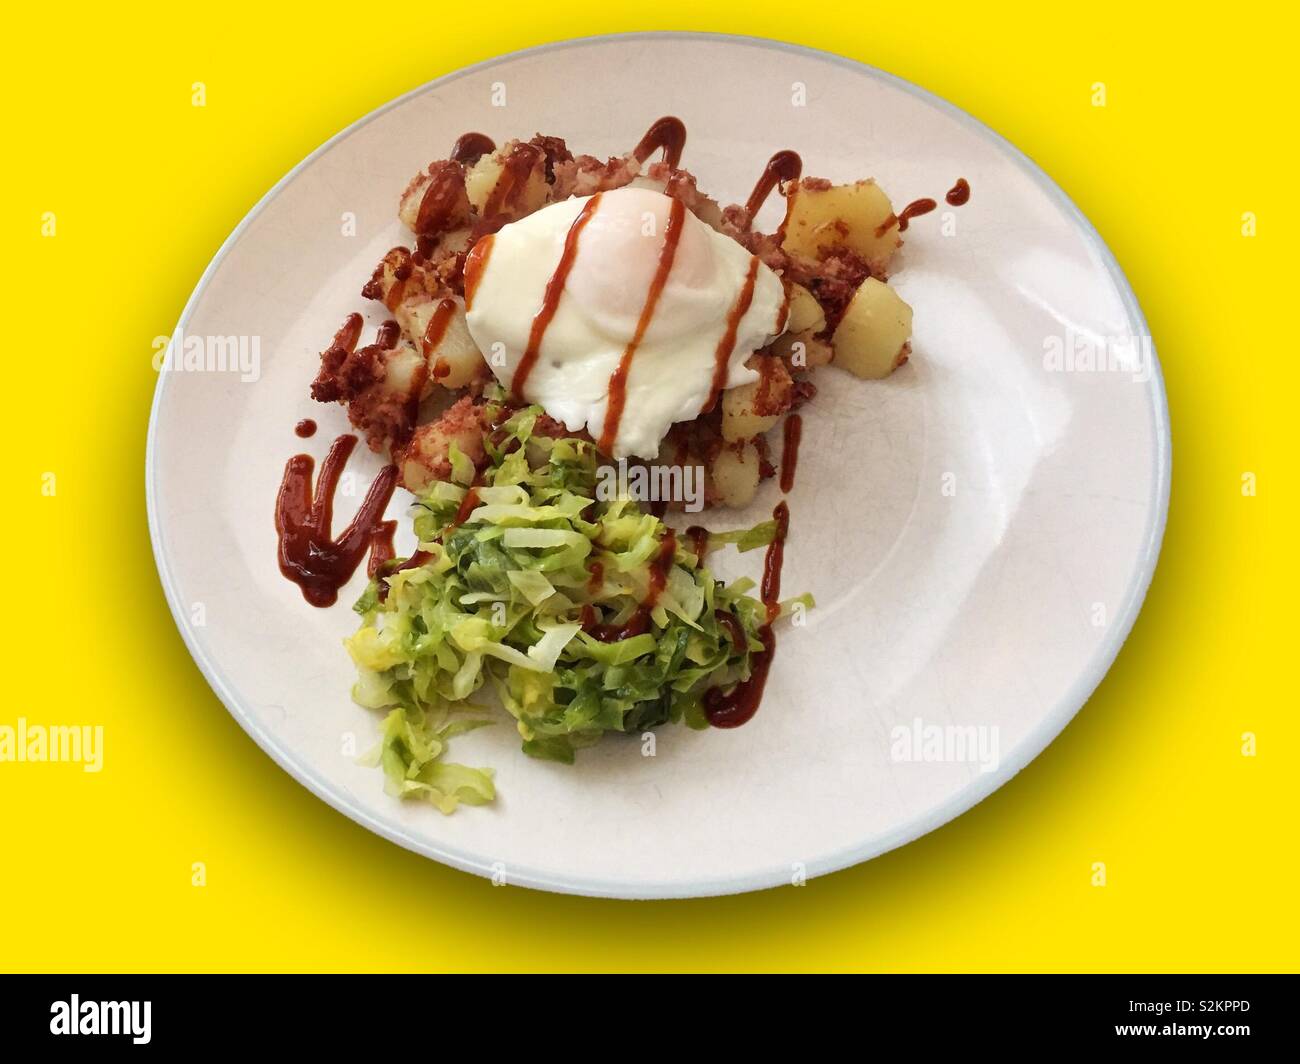 Corned beef potato hash with greens or cabbage on a colourful background.  Served with a brown sauce over the top and an egg.  Hearty food.  Filling meal cooked at home Stock Photo